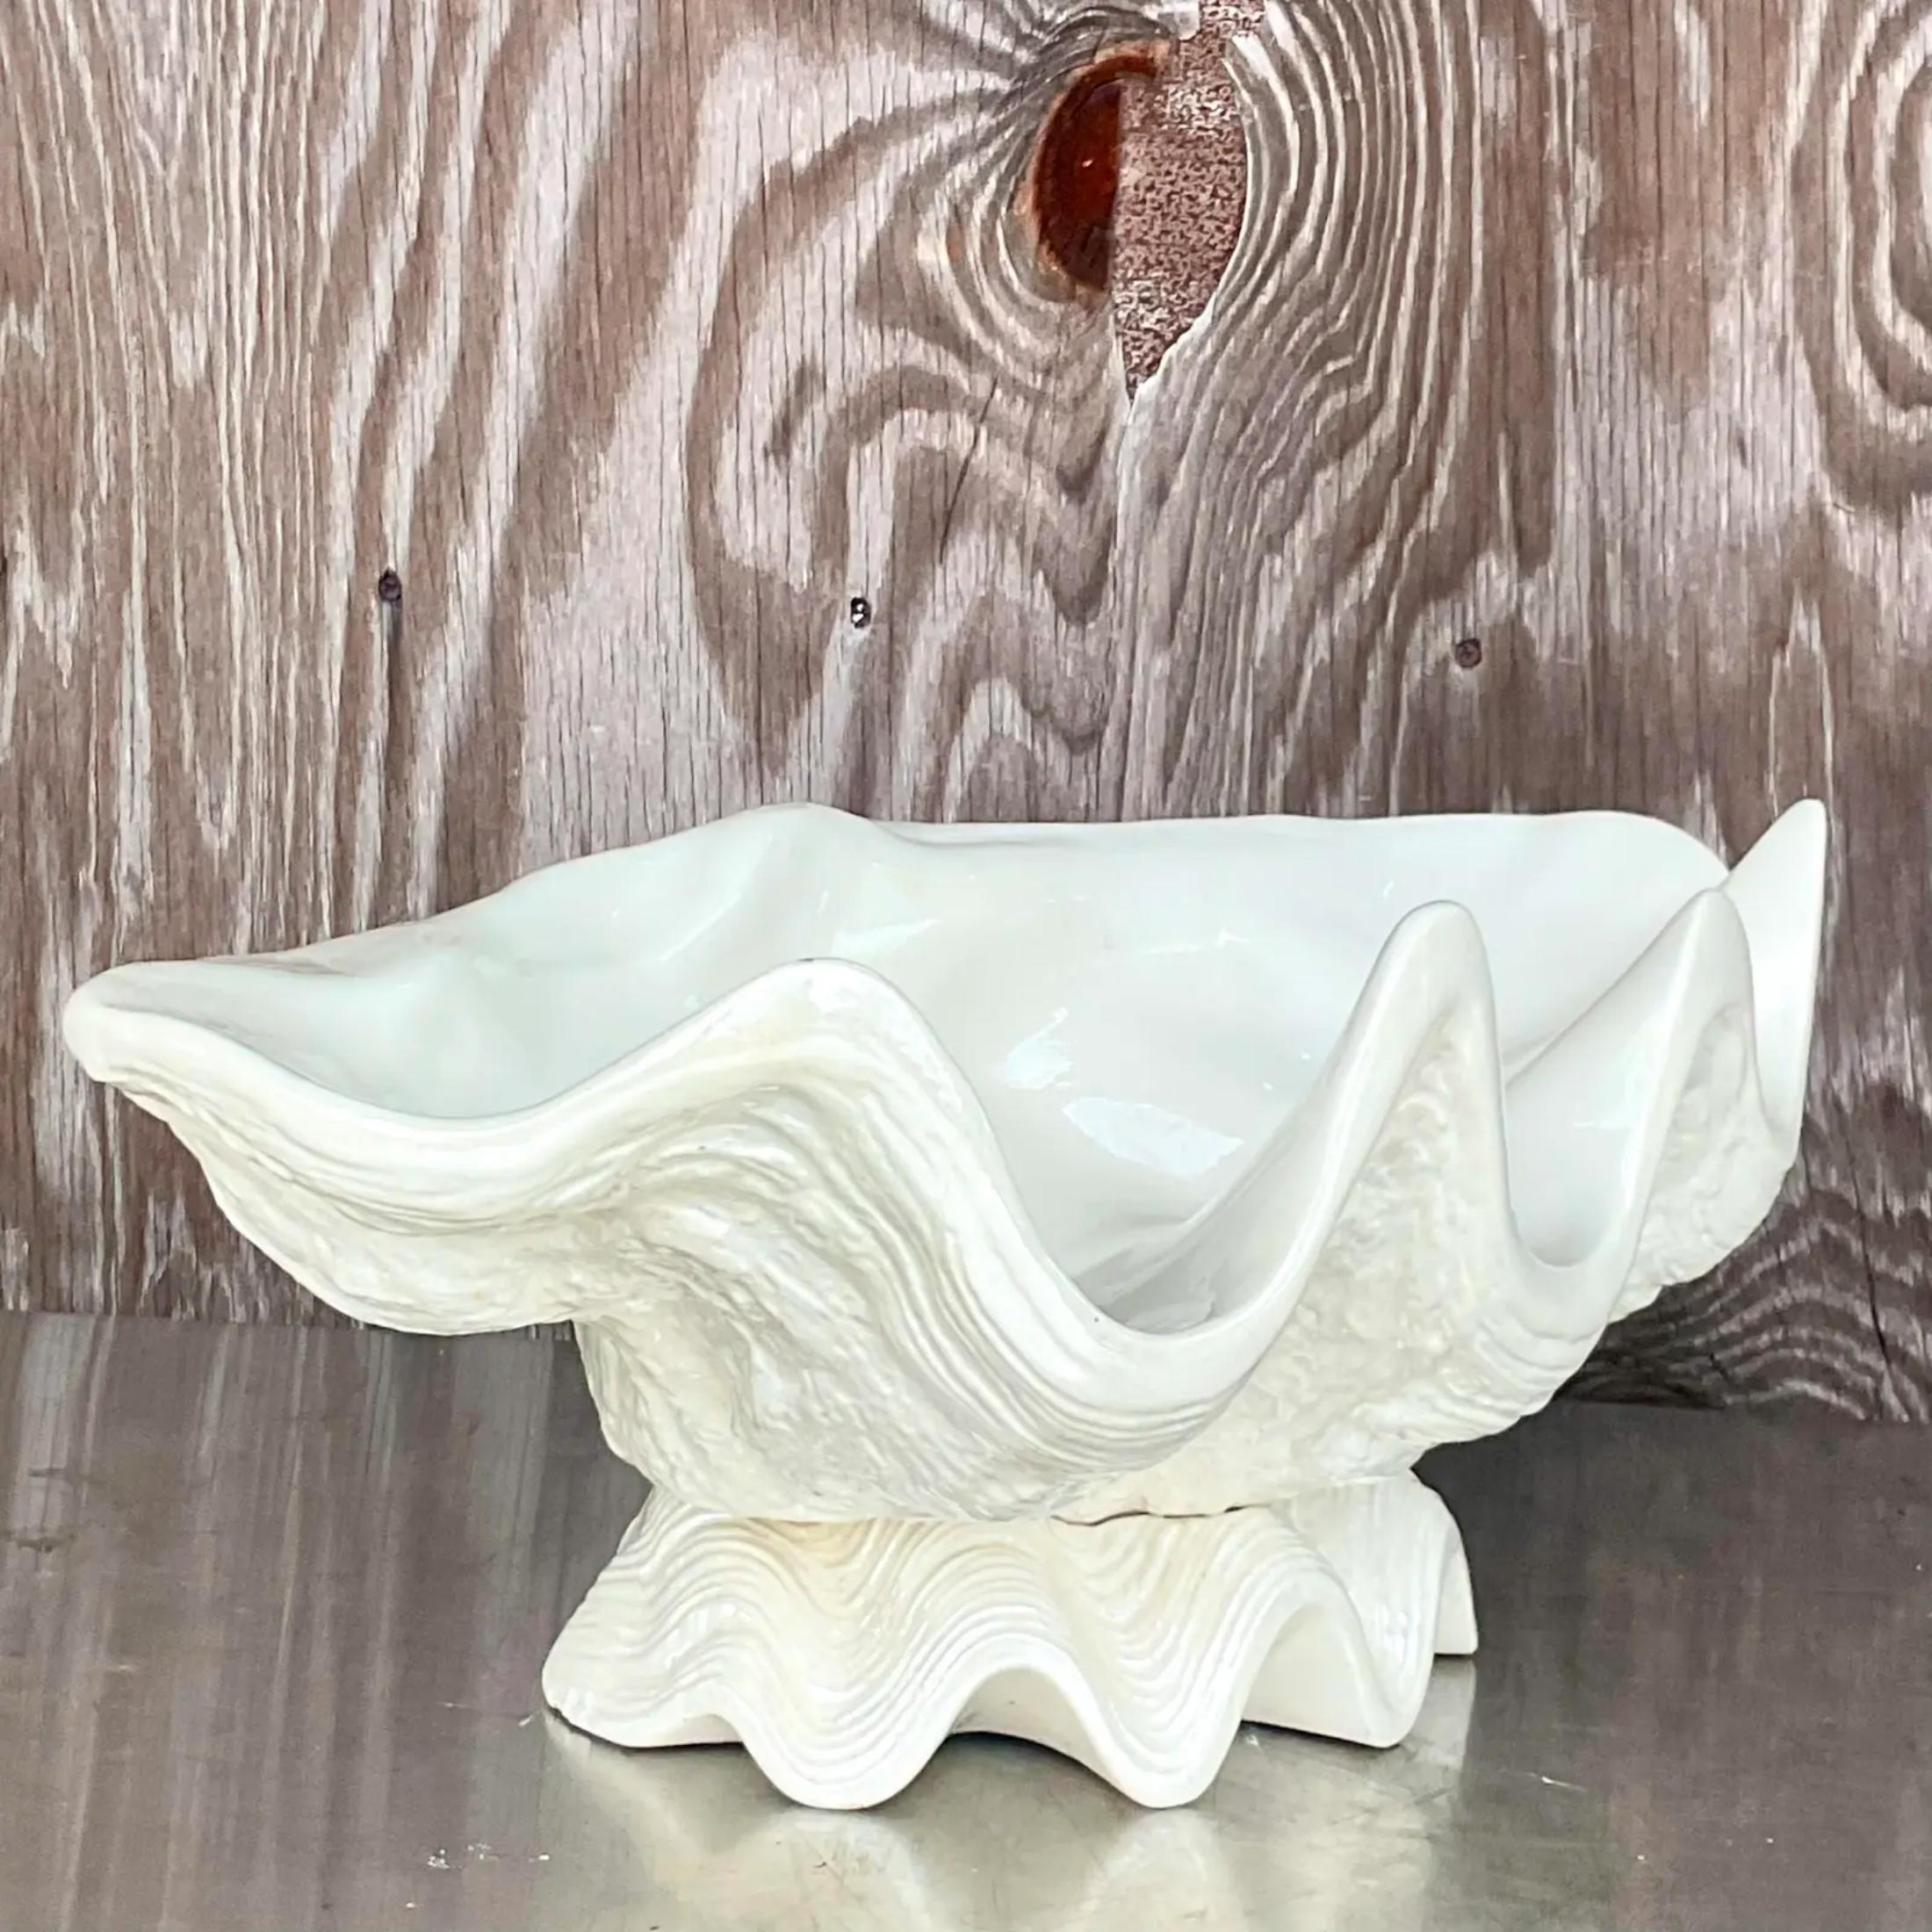 Vintage Coastal giant clamshell bowl. A chic glazed ceramic finish. Perfect for orchids on your entry console. Signed and dated 1983 on the bottom. Acquired from a Palm Beach estate